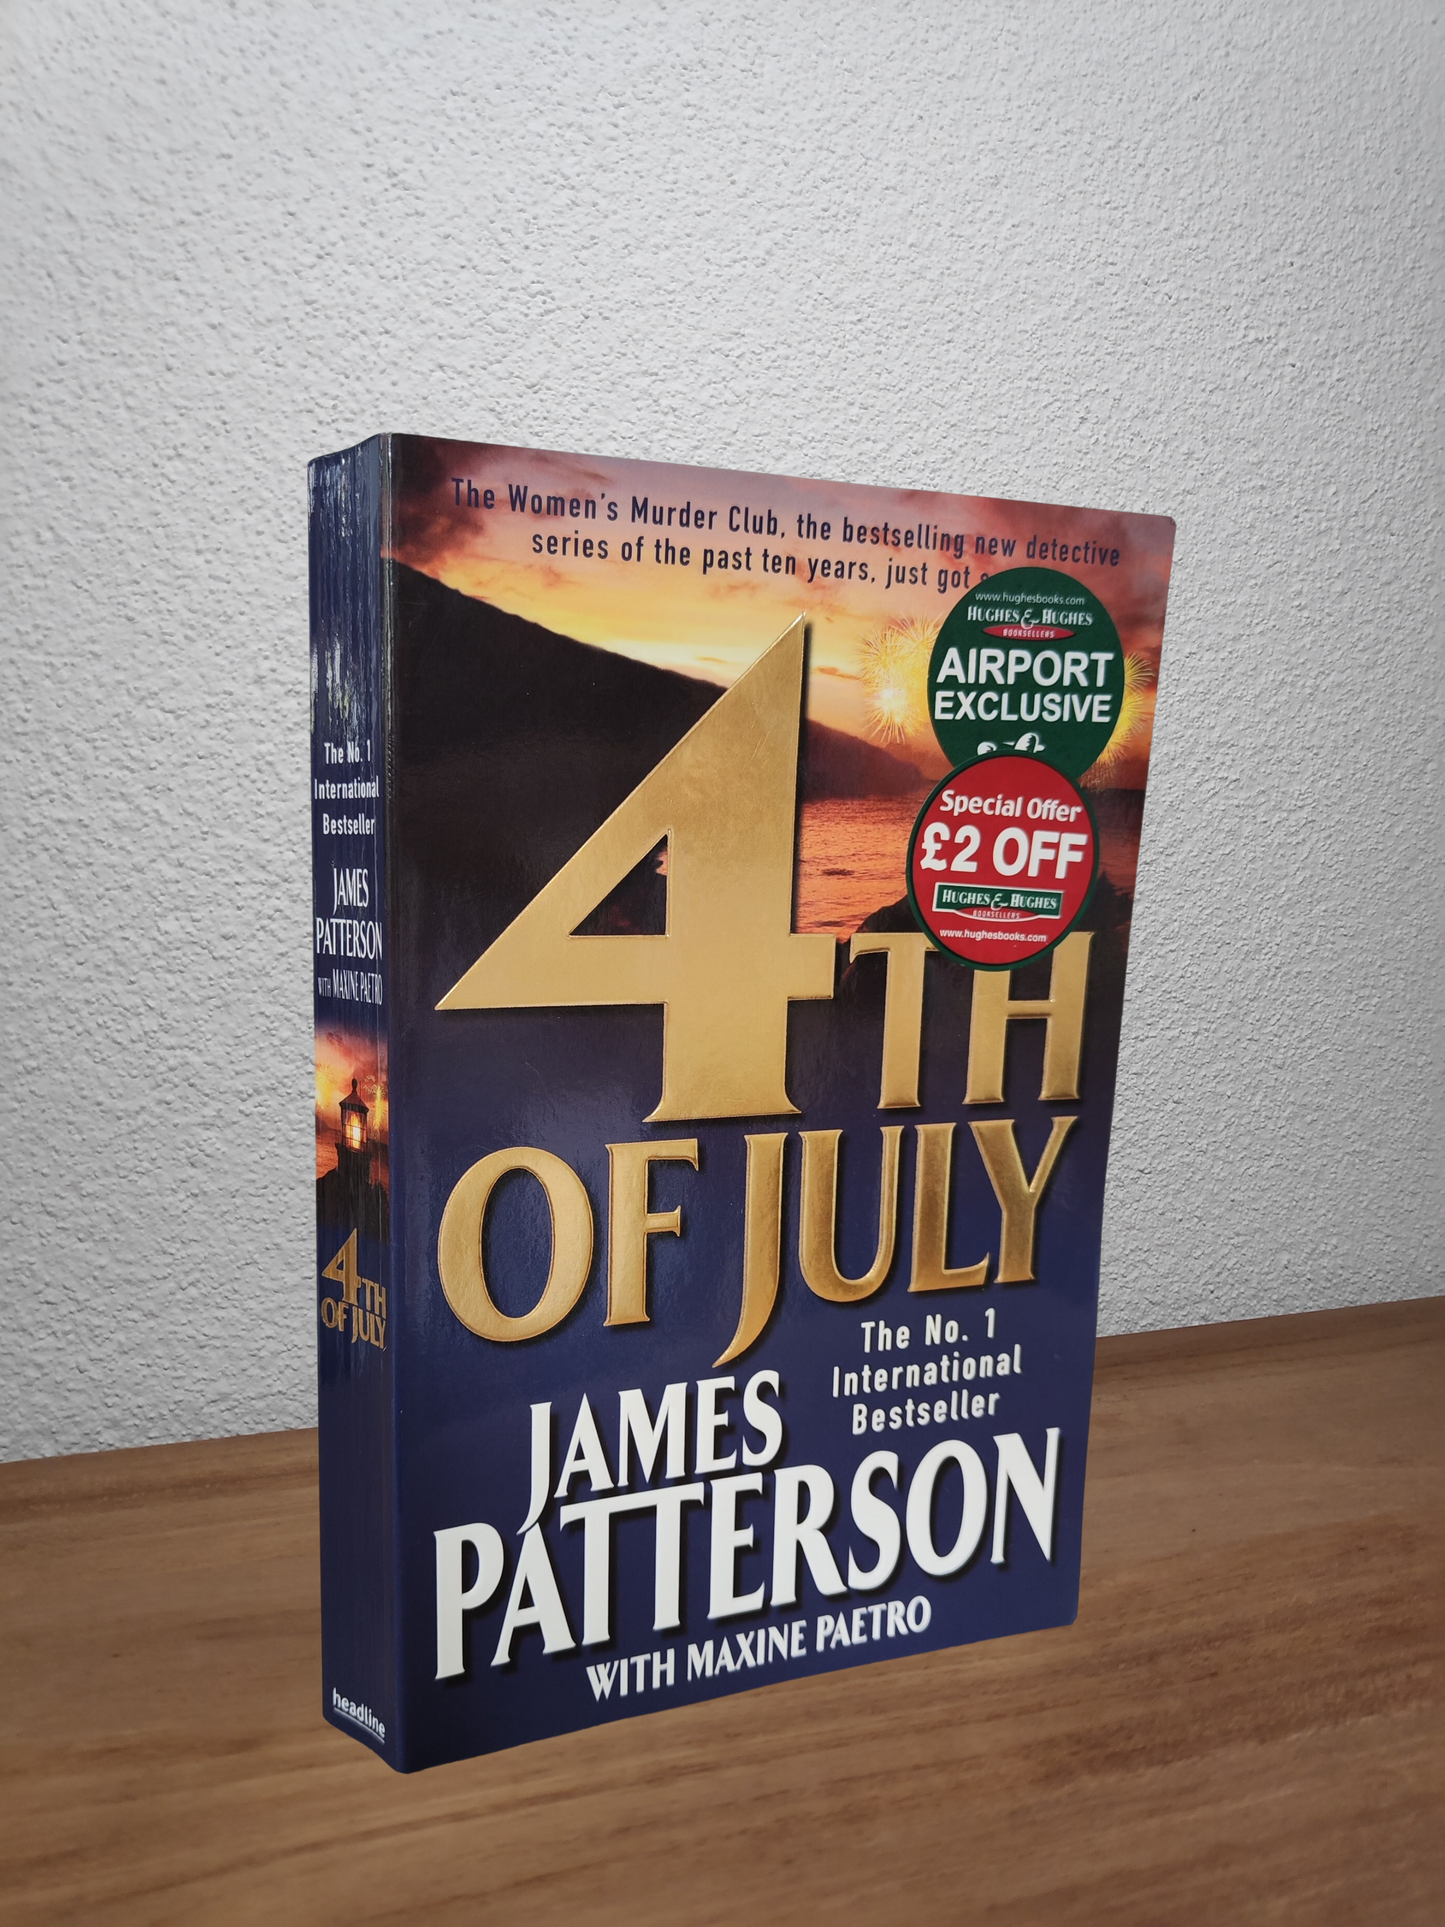 James Patterson & Maxine Paetro - 4th of July (Women's Murder Club #4)